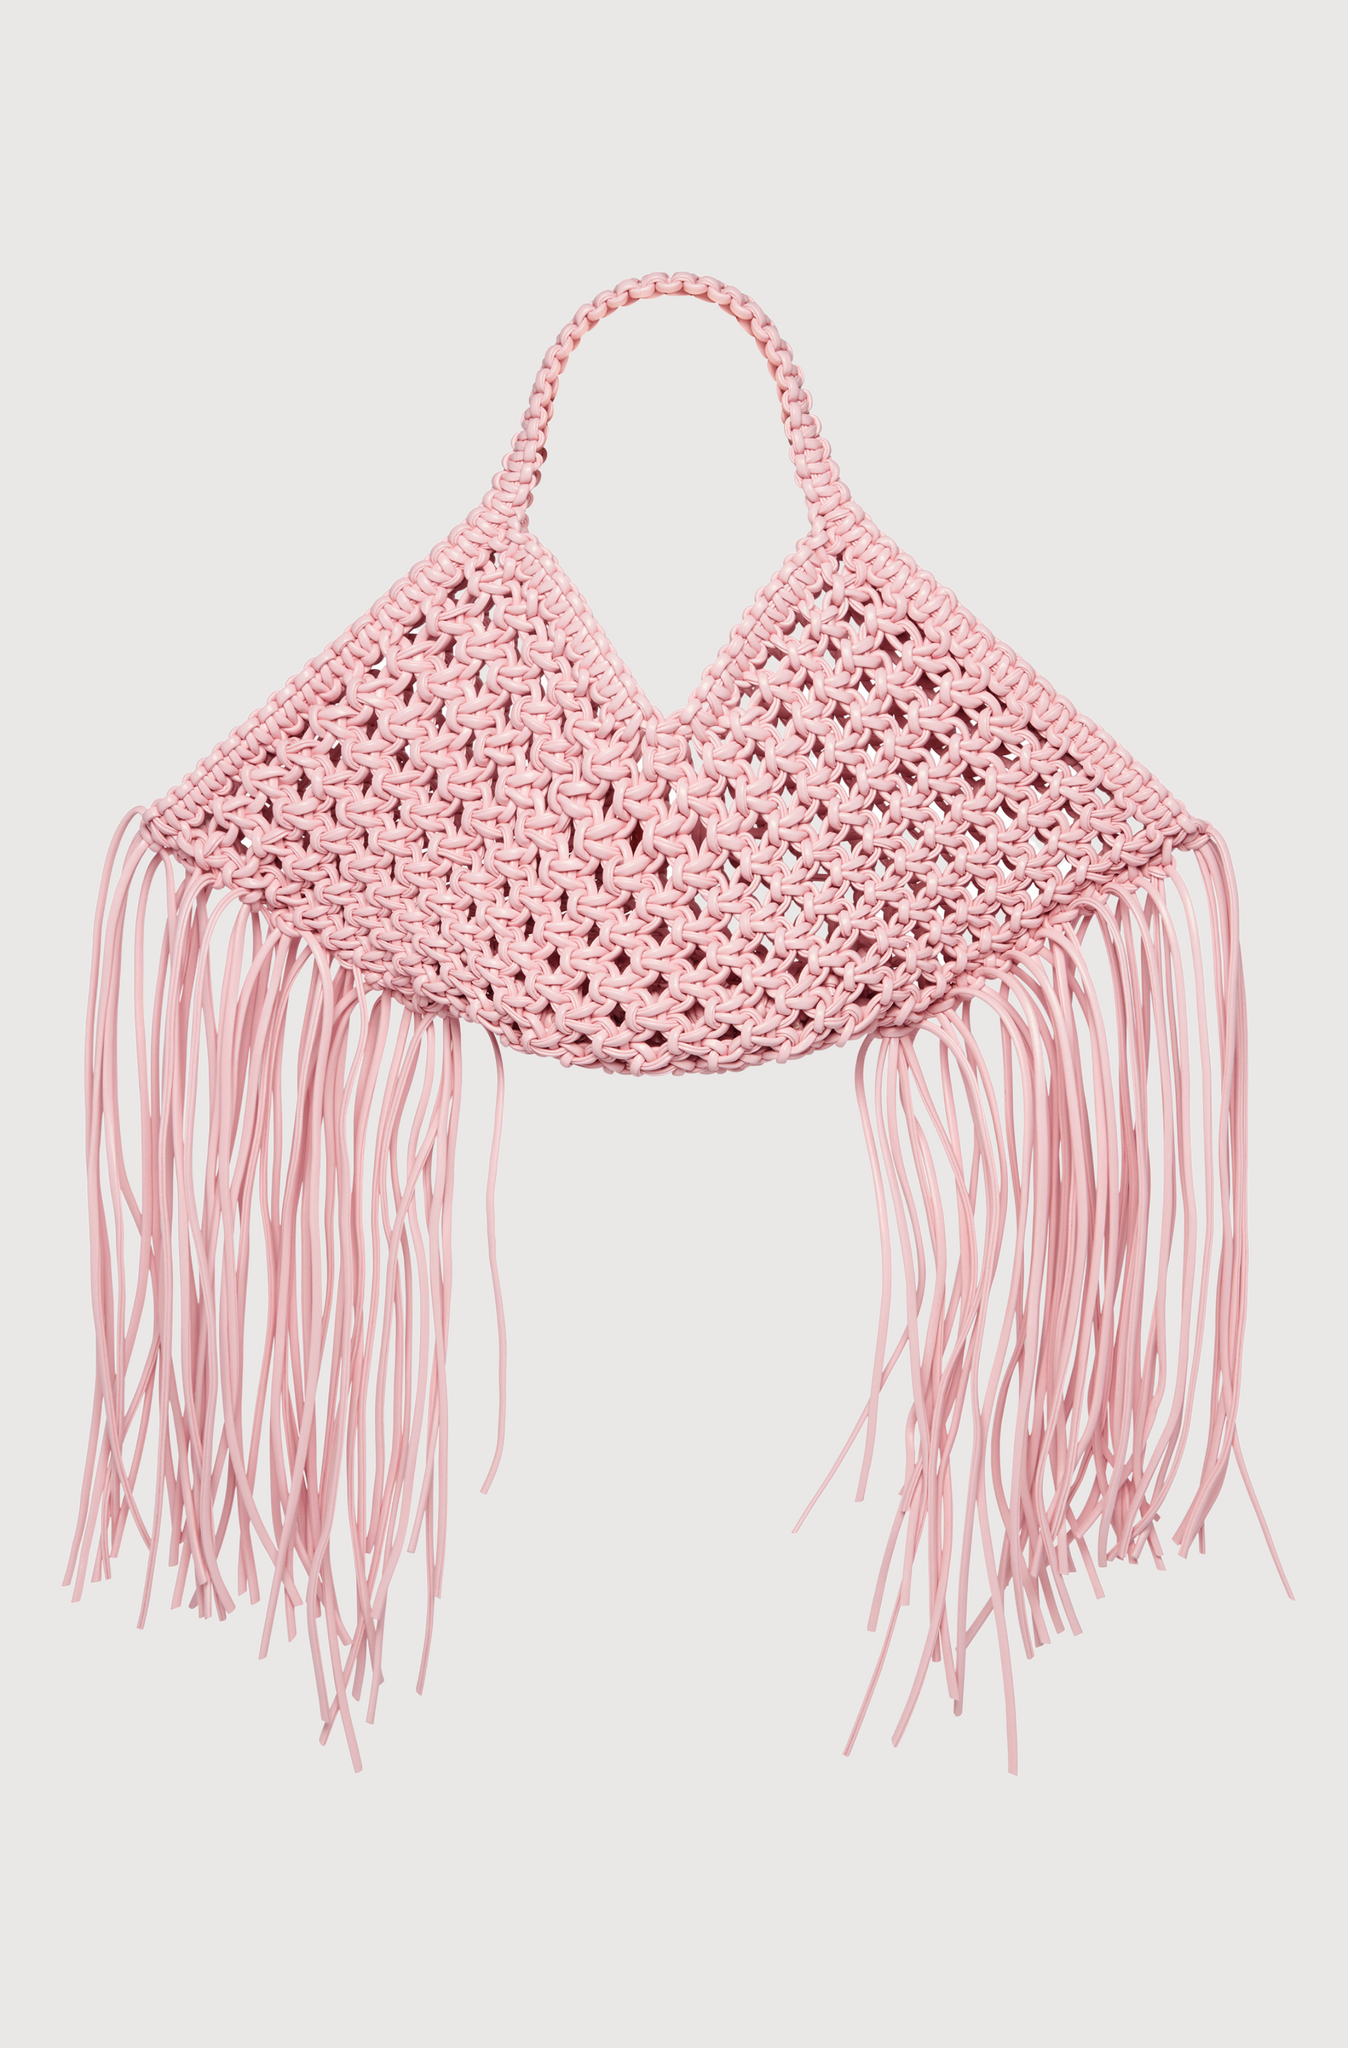 SMALL WOVEN BASKET - PINK